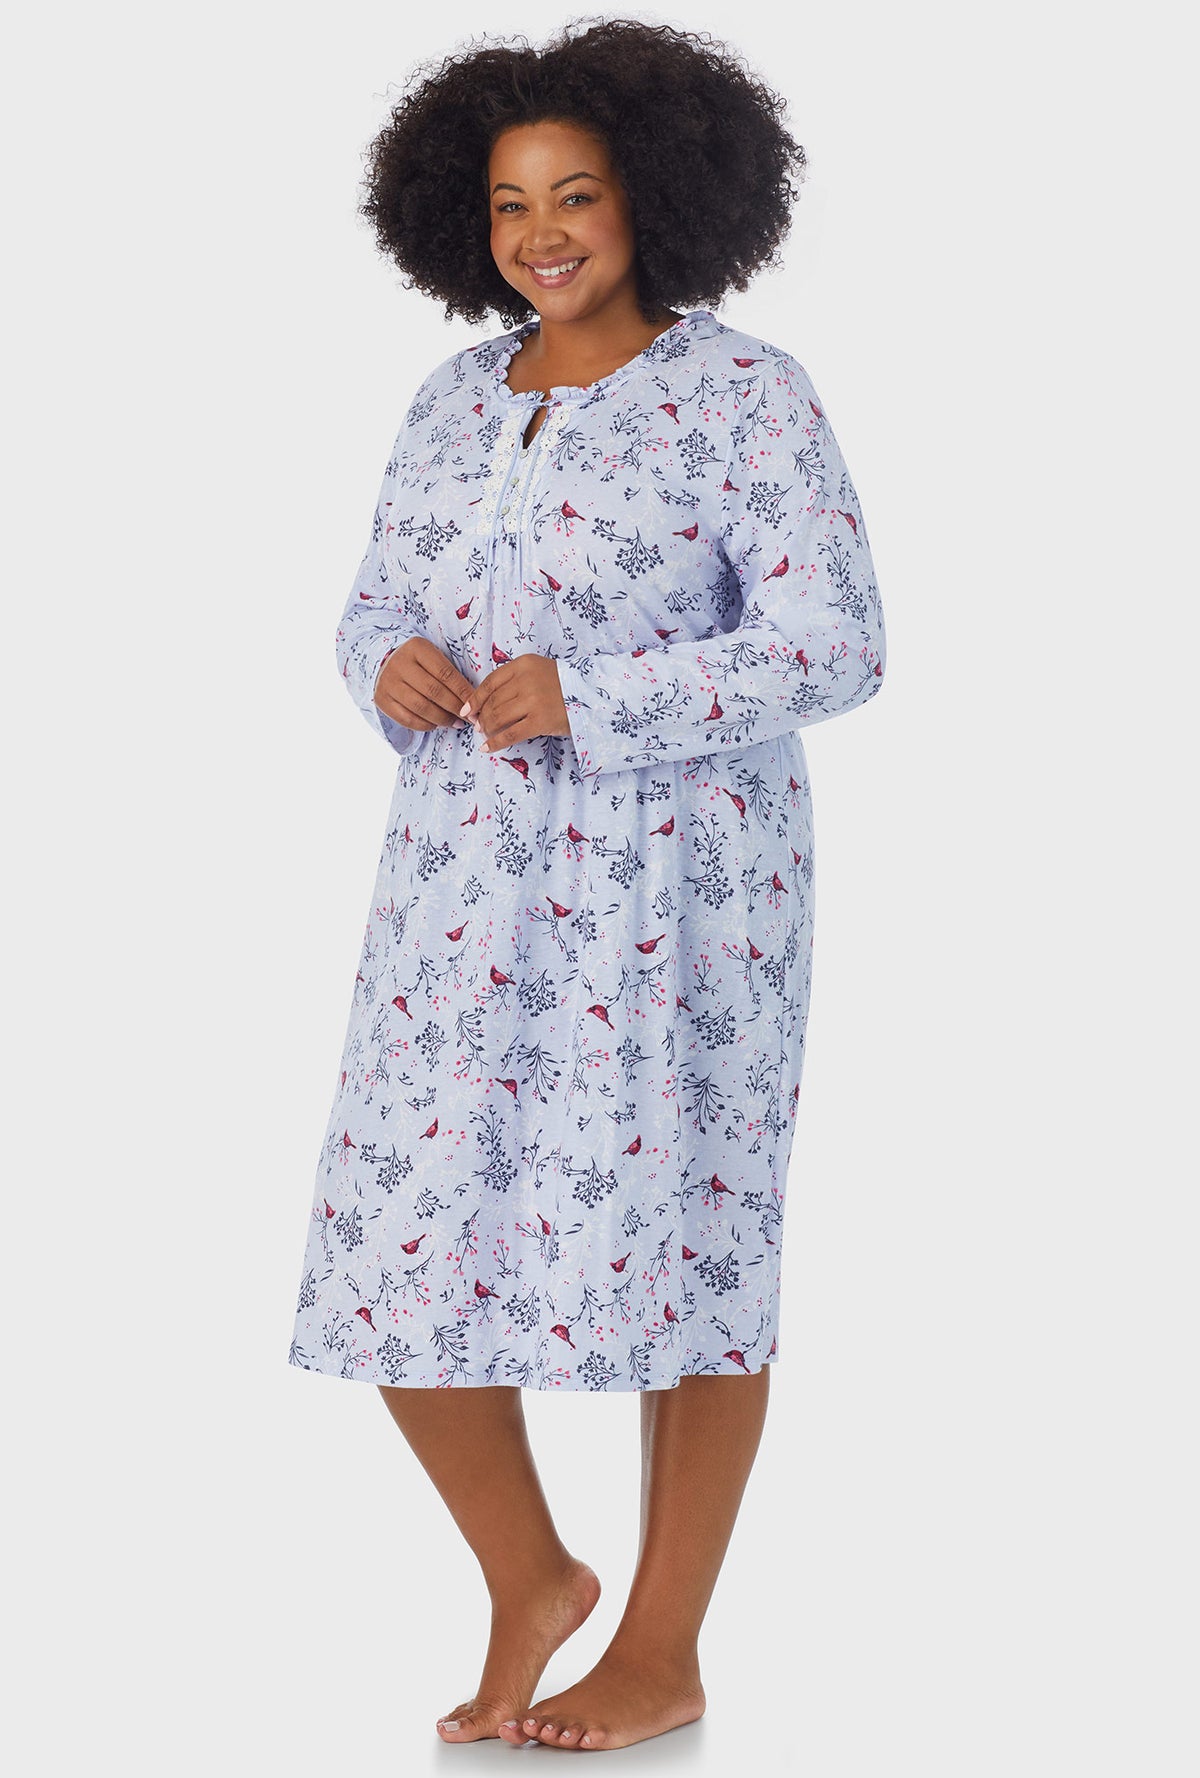 A lady wearing white Long Sleeve Midi plus size Nightgown with Winter Blue Cardinal print